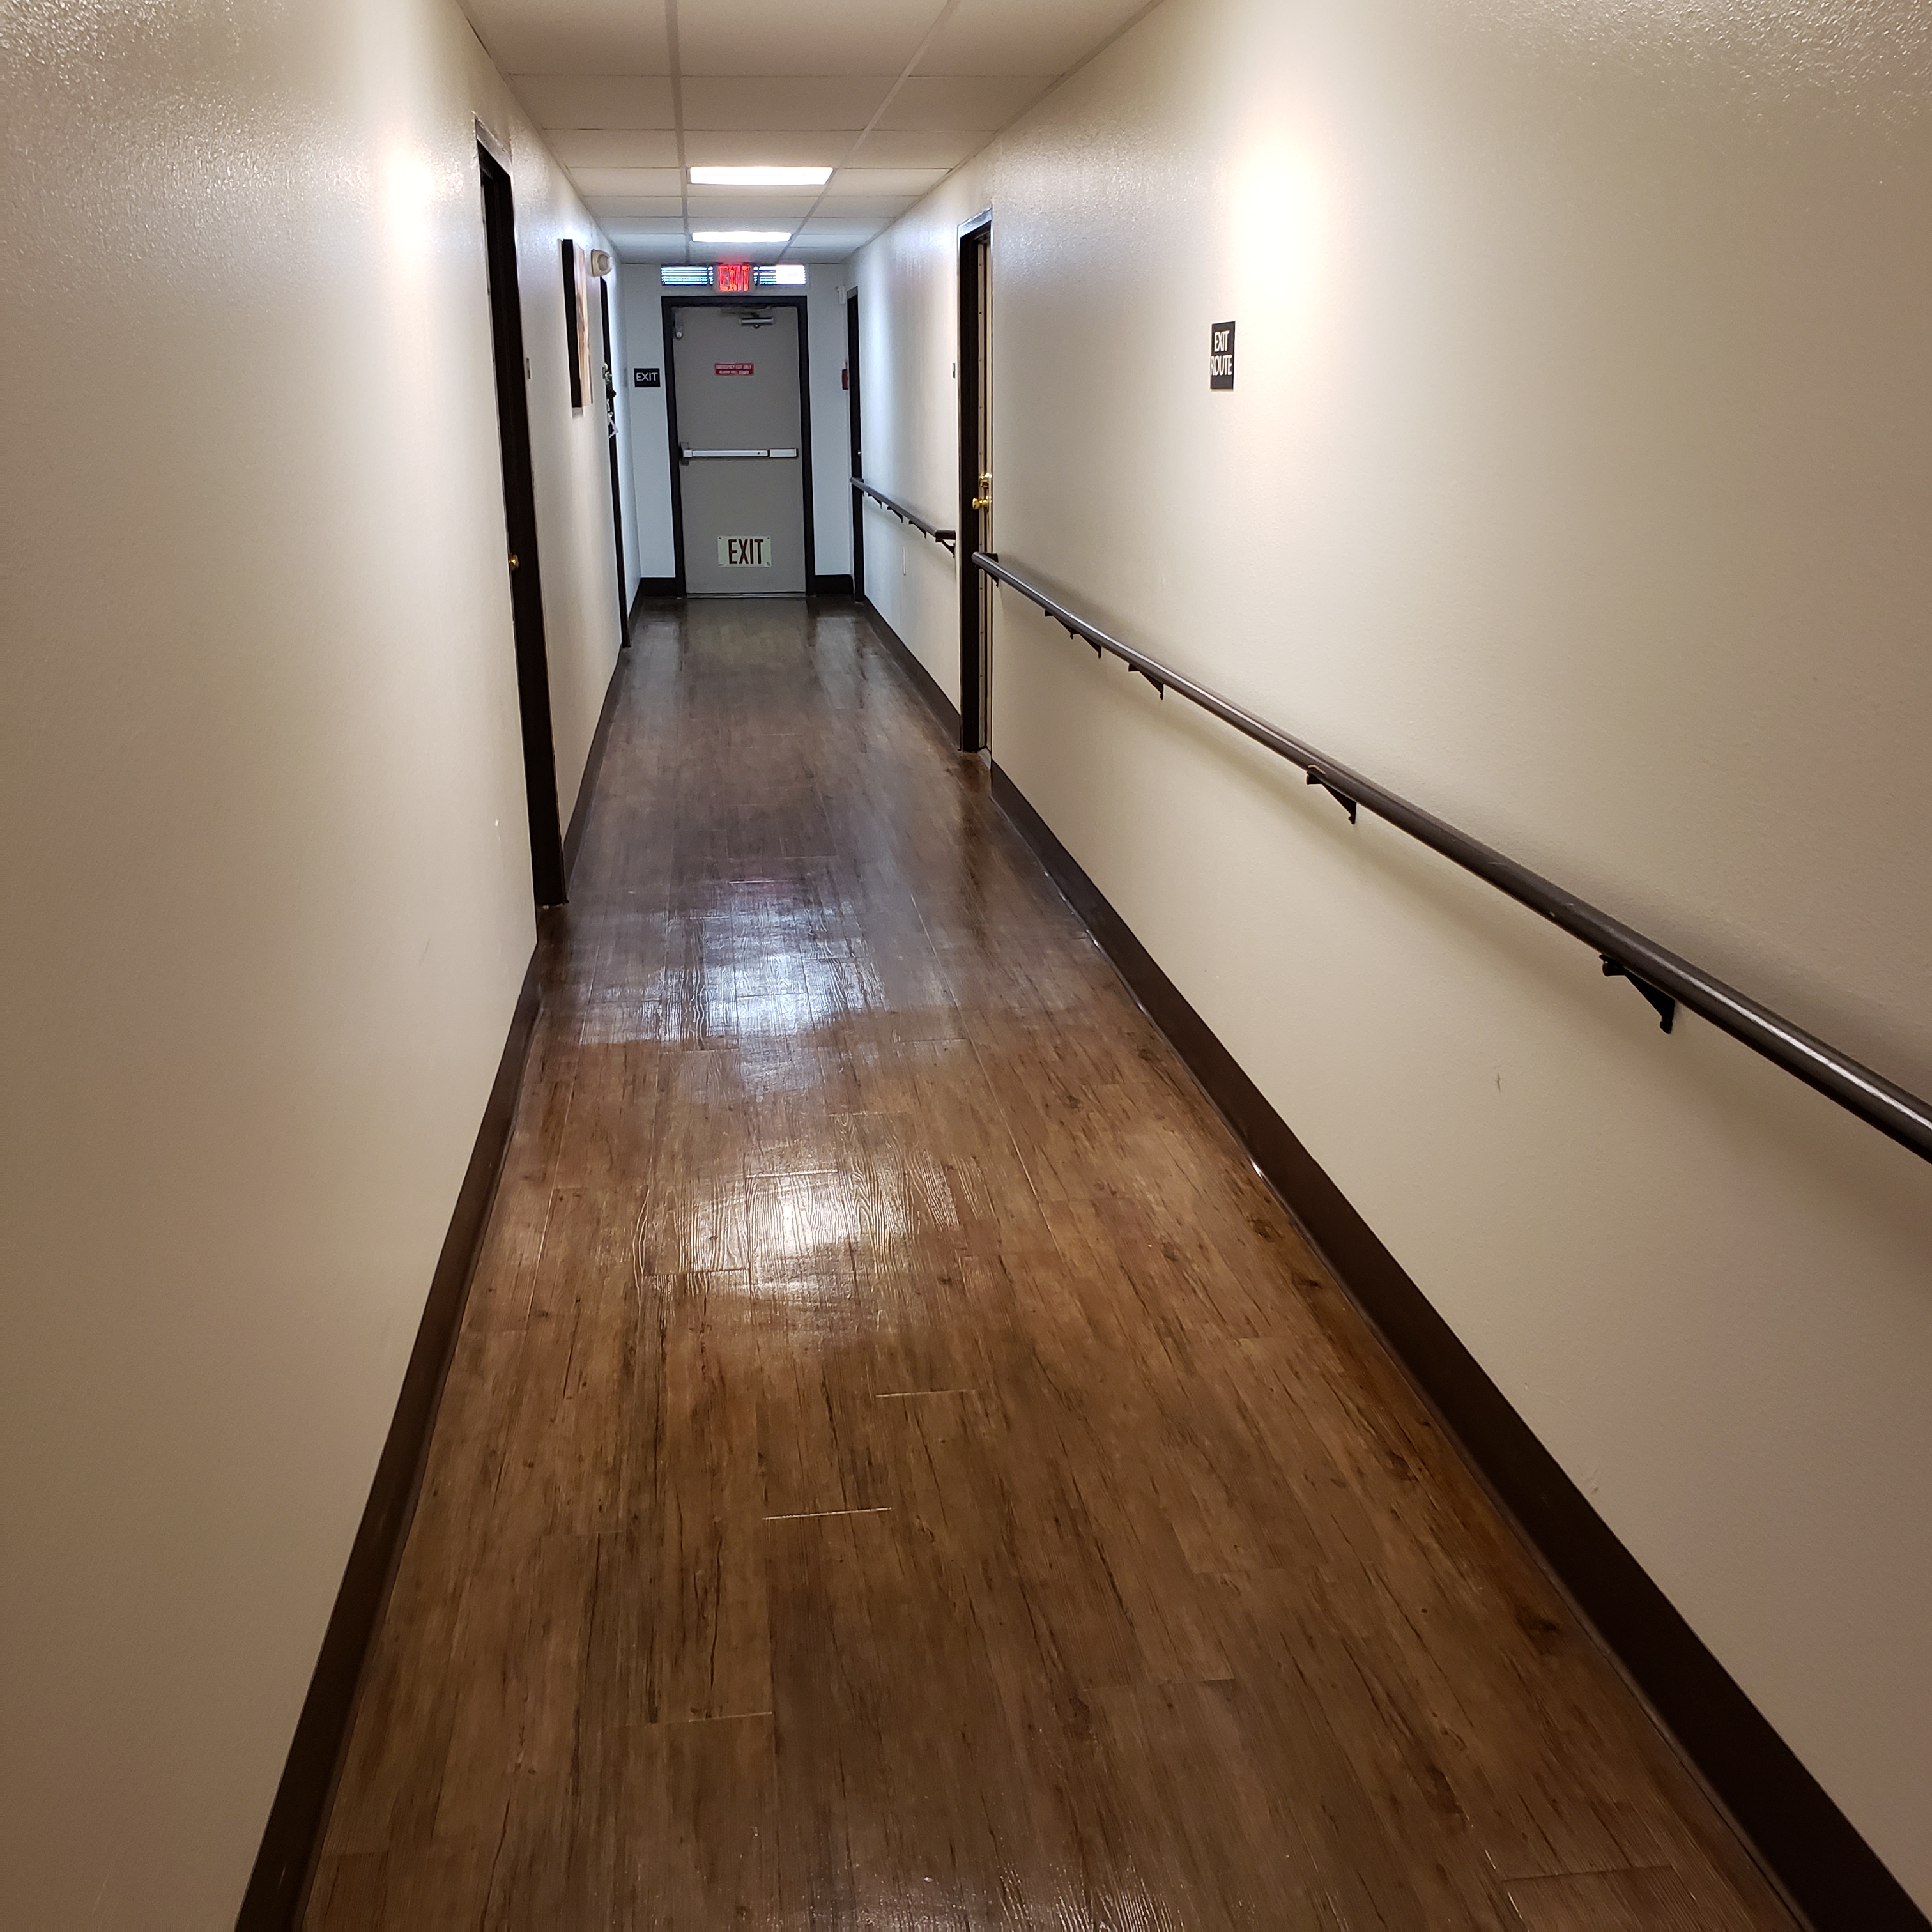 Image of tres lomas garden apartments hallway. long hallway with handrails along one side of the all.